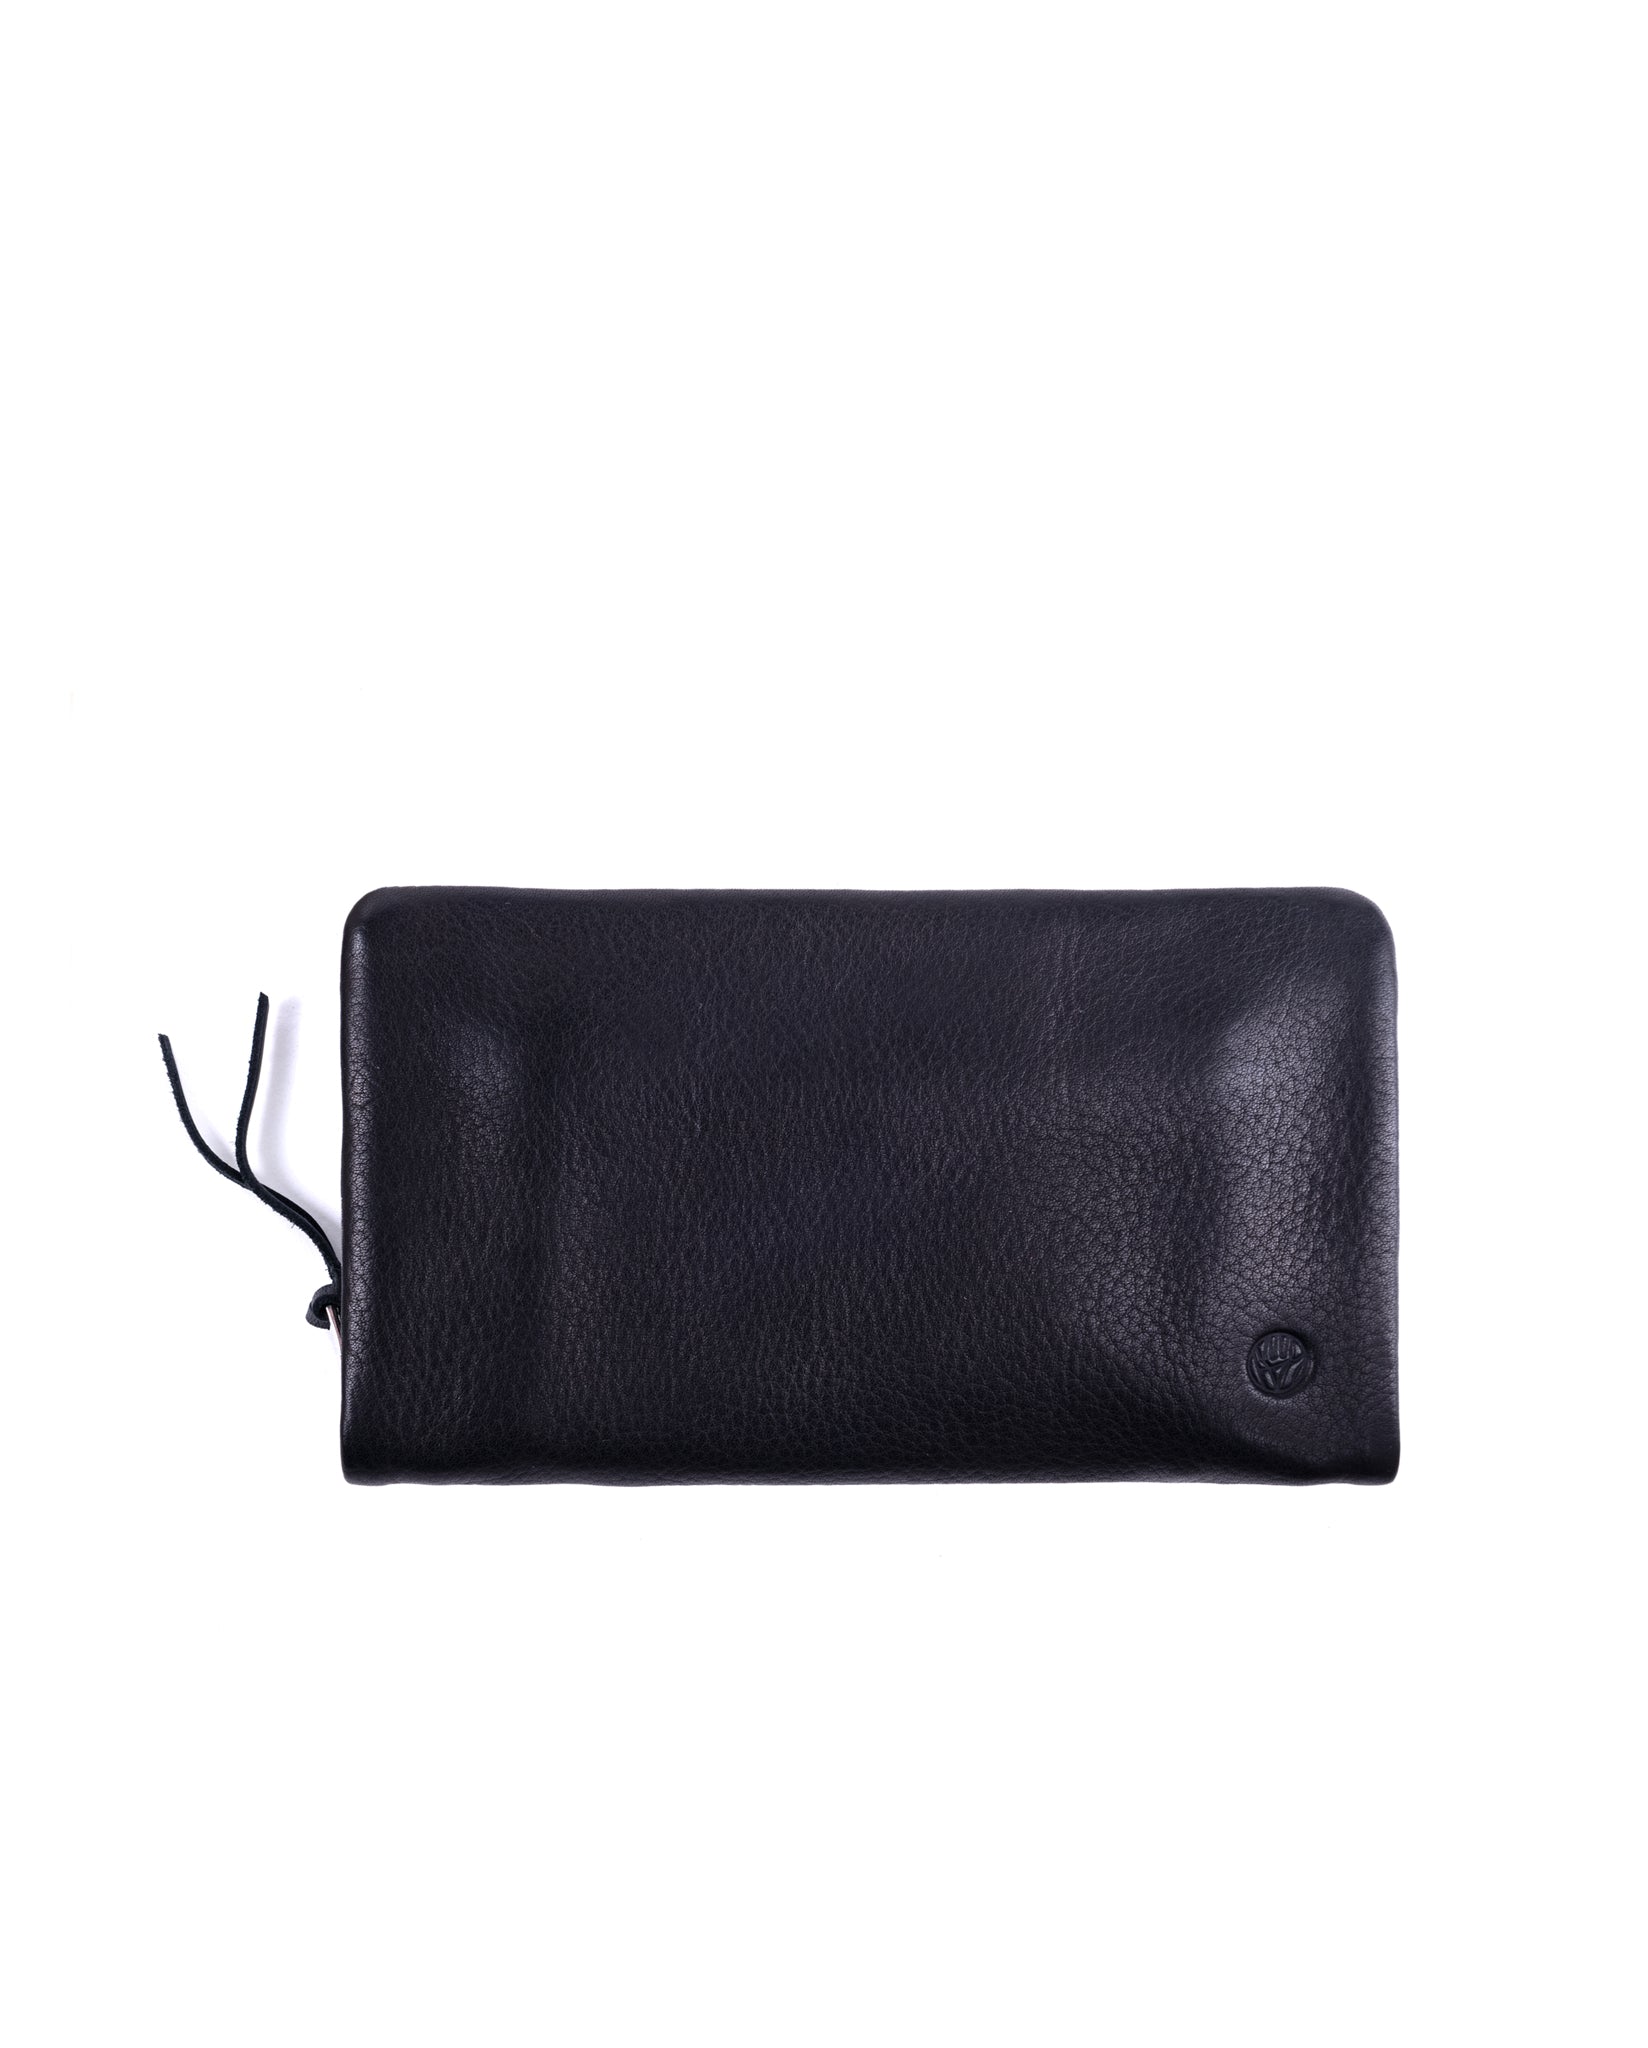 Chacoral Soft wallet zip large